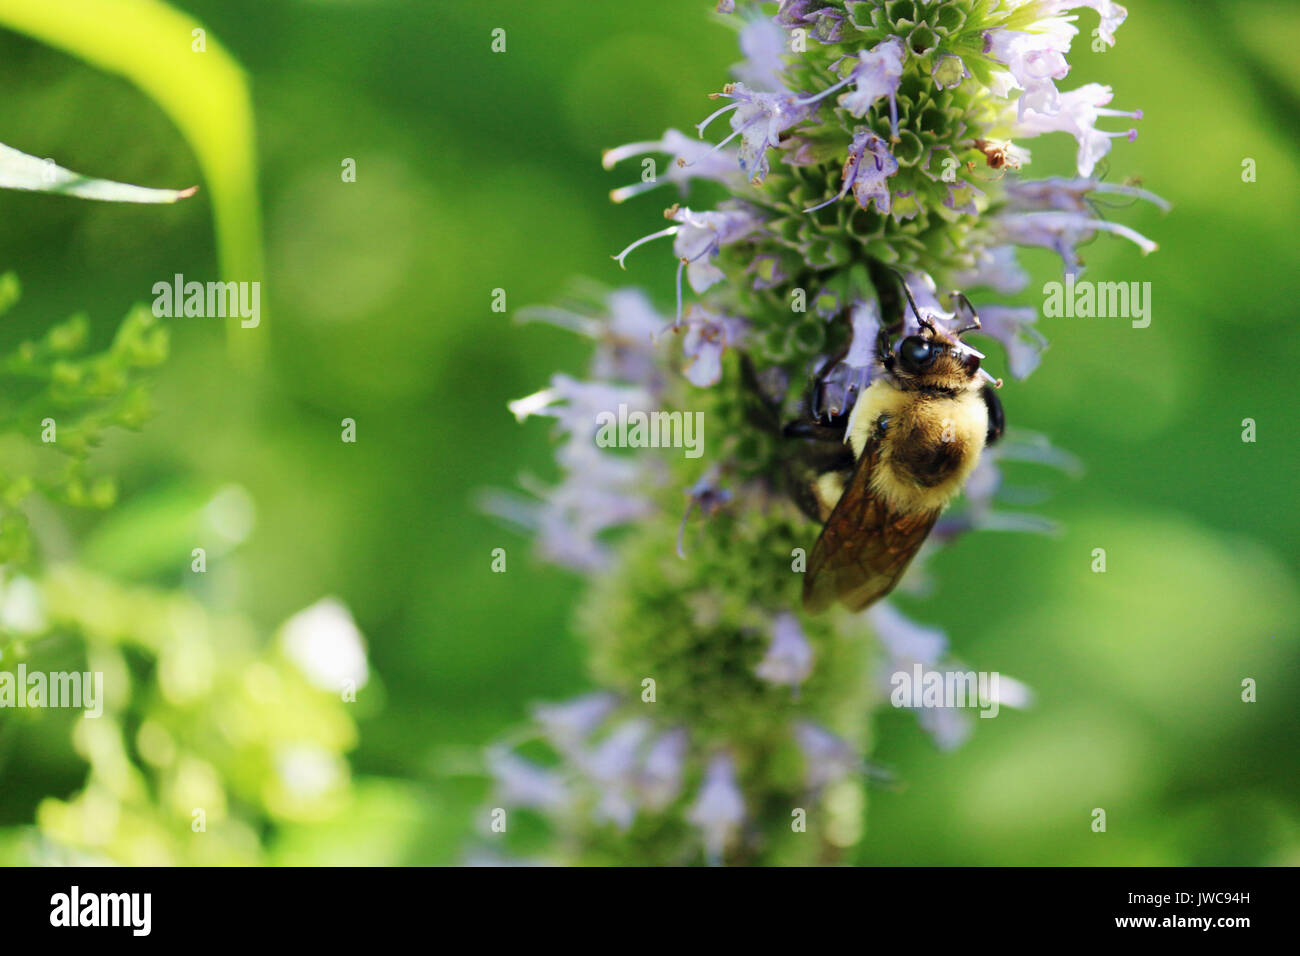 A bumble Bee on a light purple flower with an all green natural background. Stock Photo